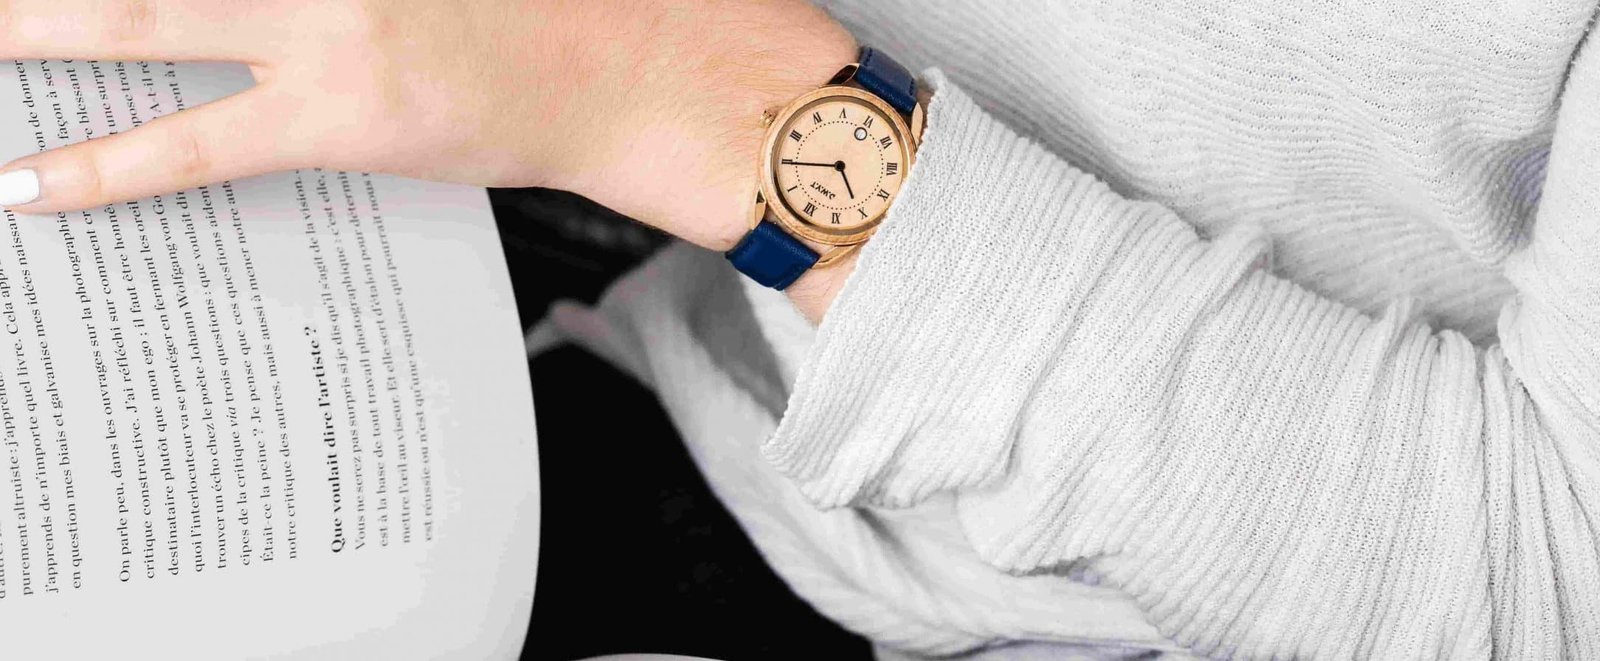 Focus on the Roman numeral women's watch